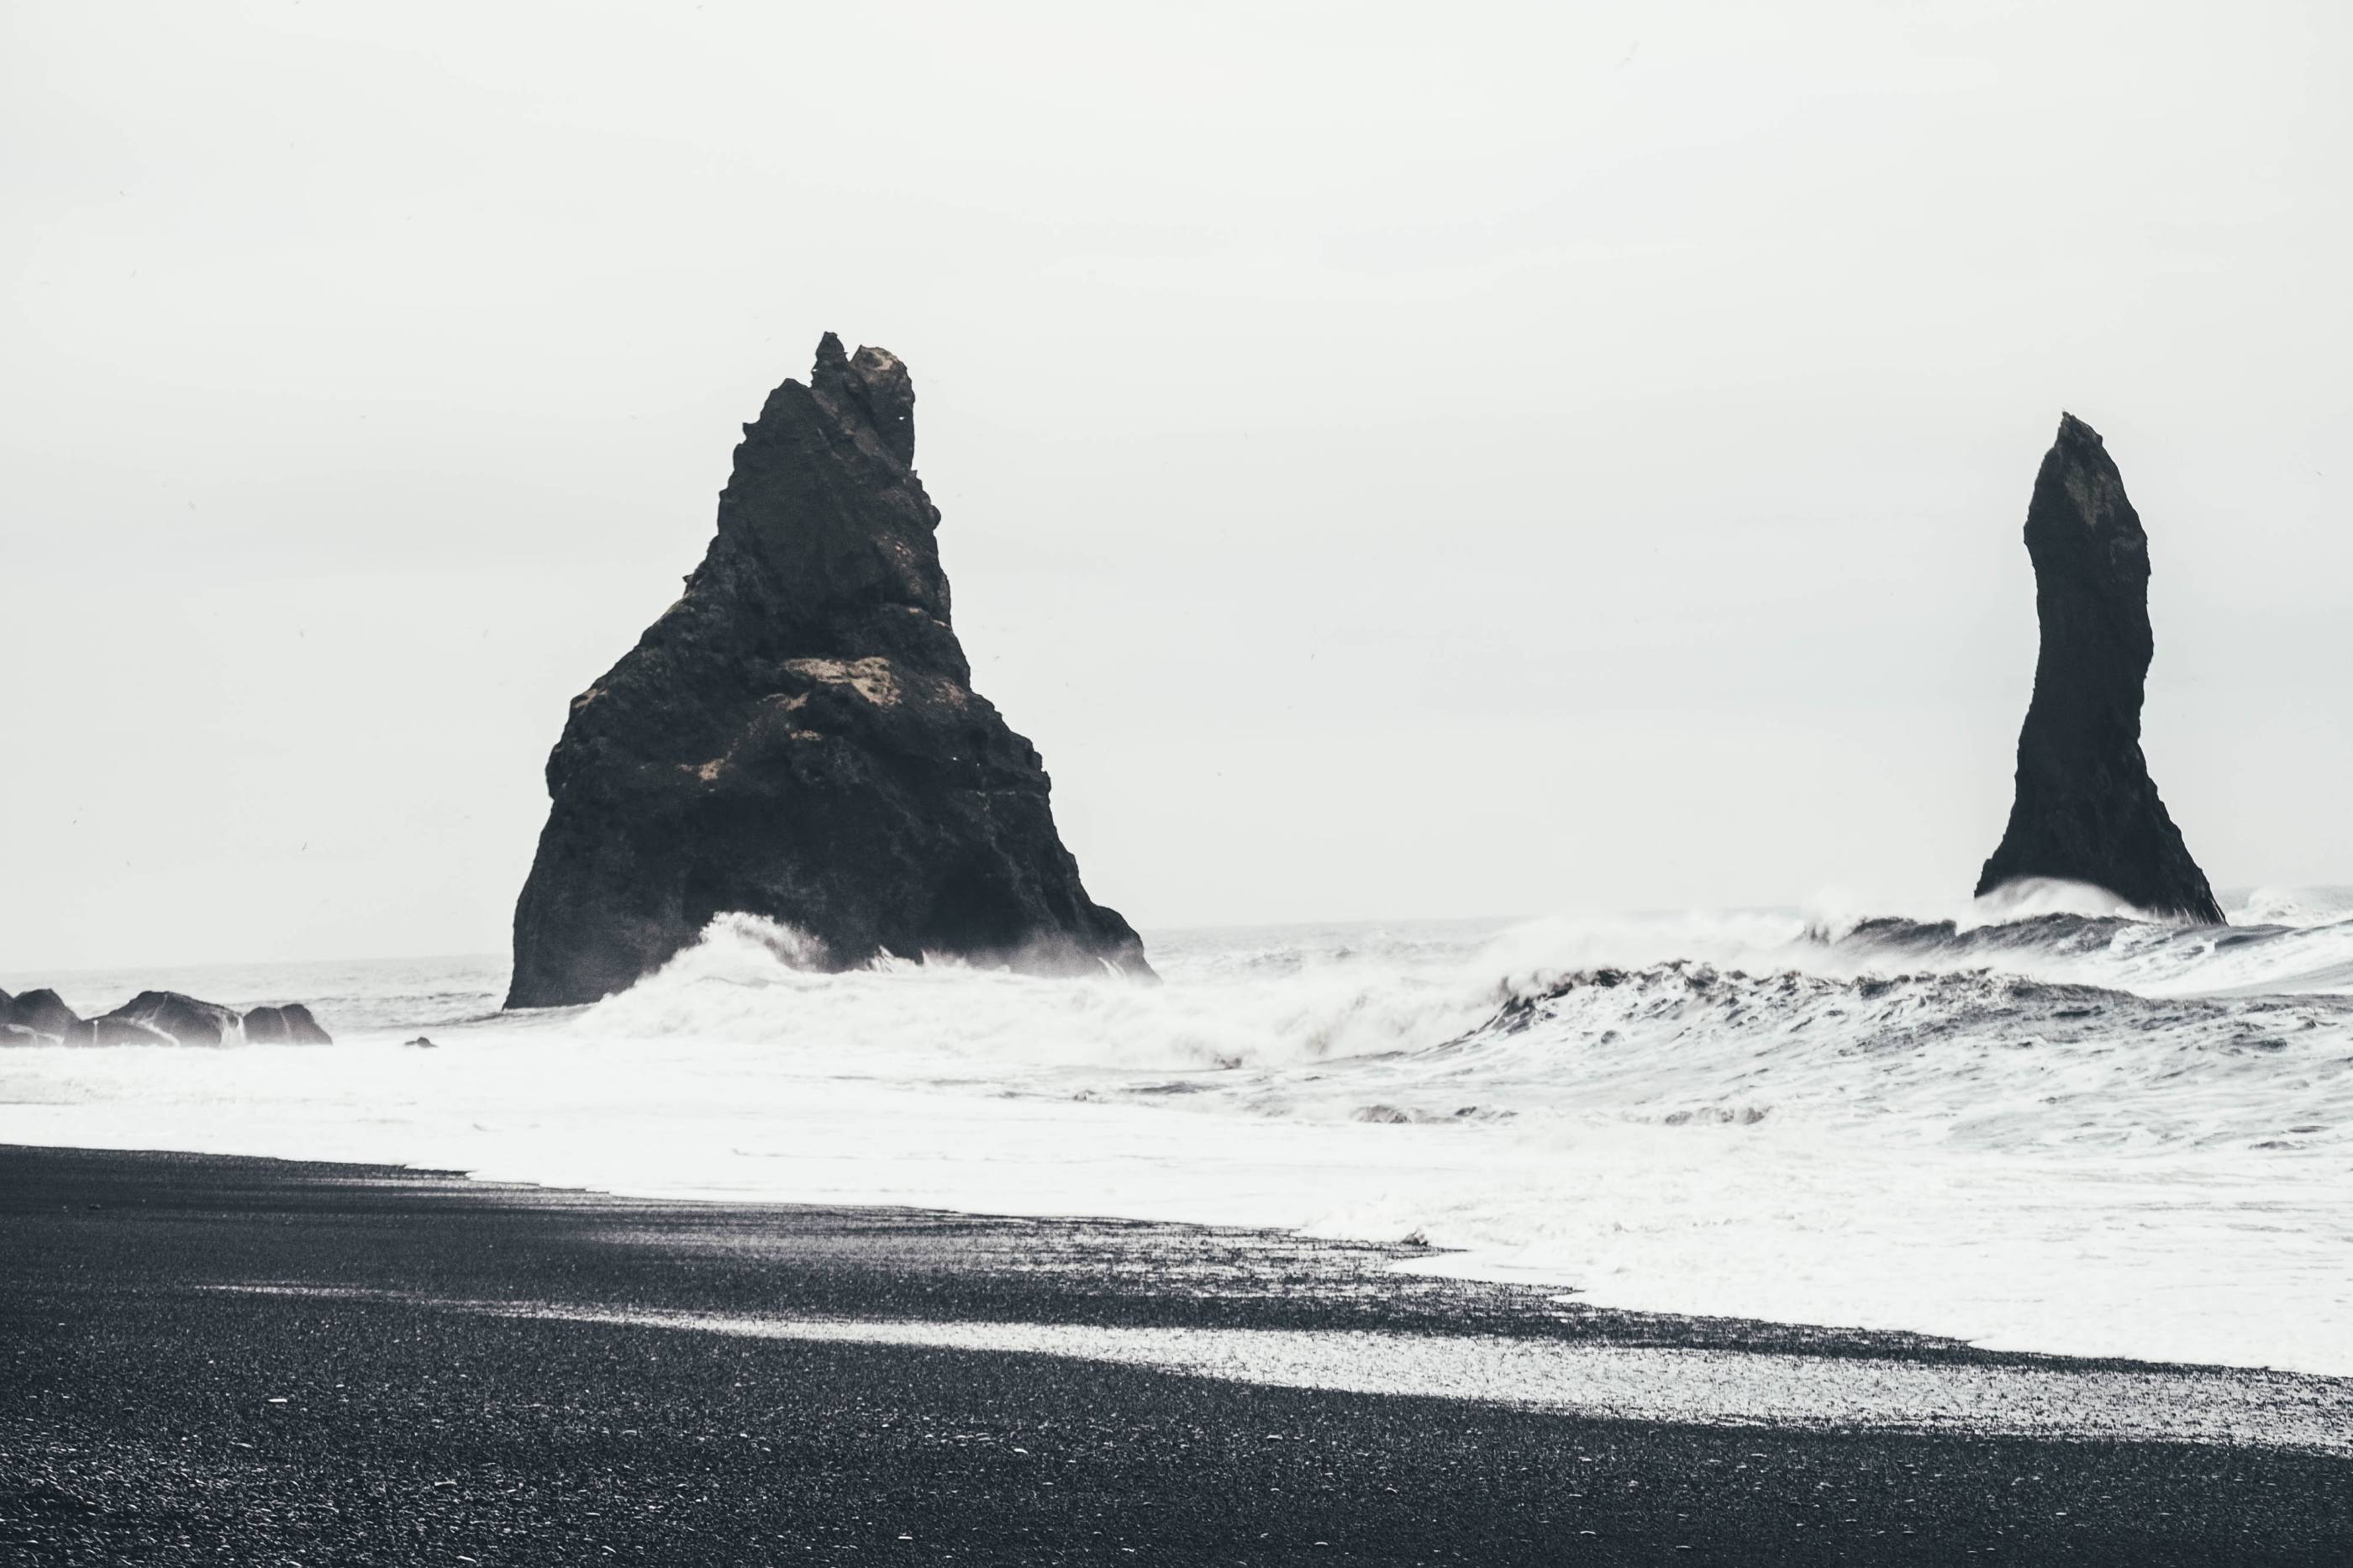 Reynisfjara-black-beach-big-roaring-waves-from-ocean-and-seeing-rocky-sea-stacks-in-background-on-a-moody-cloudy-day